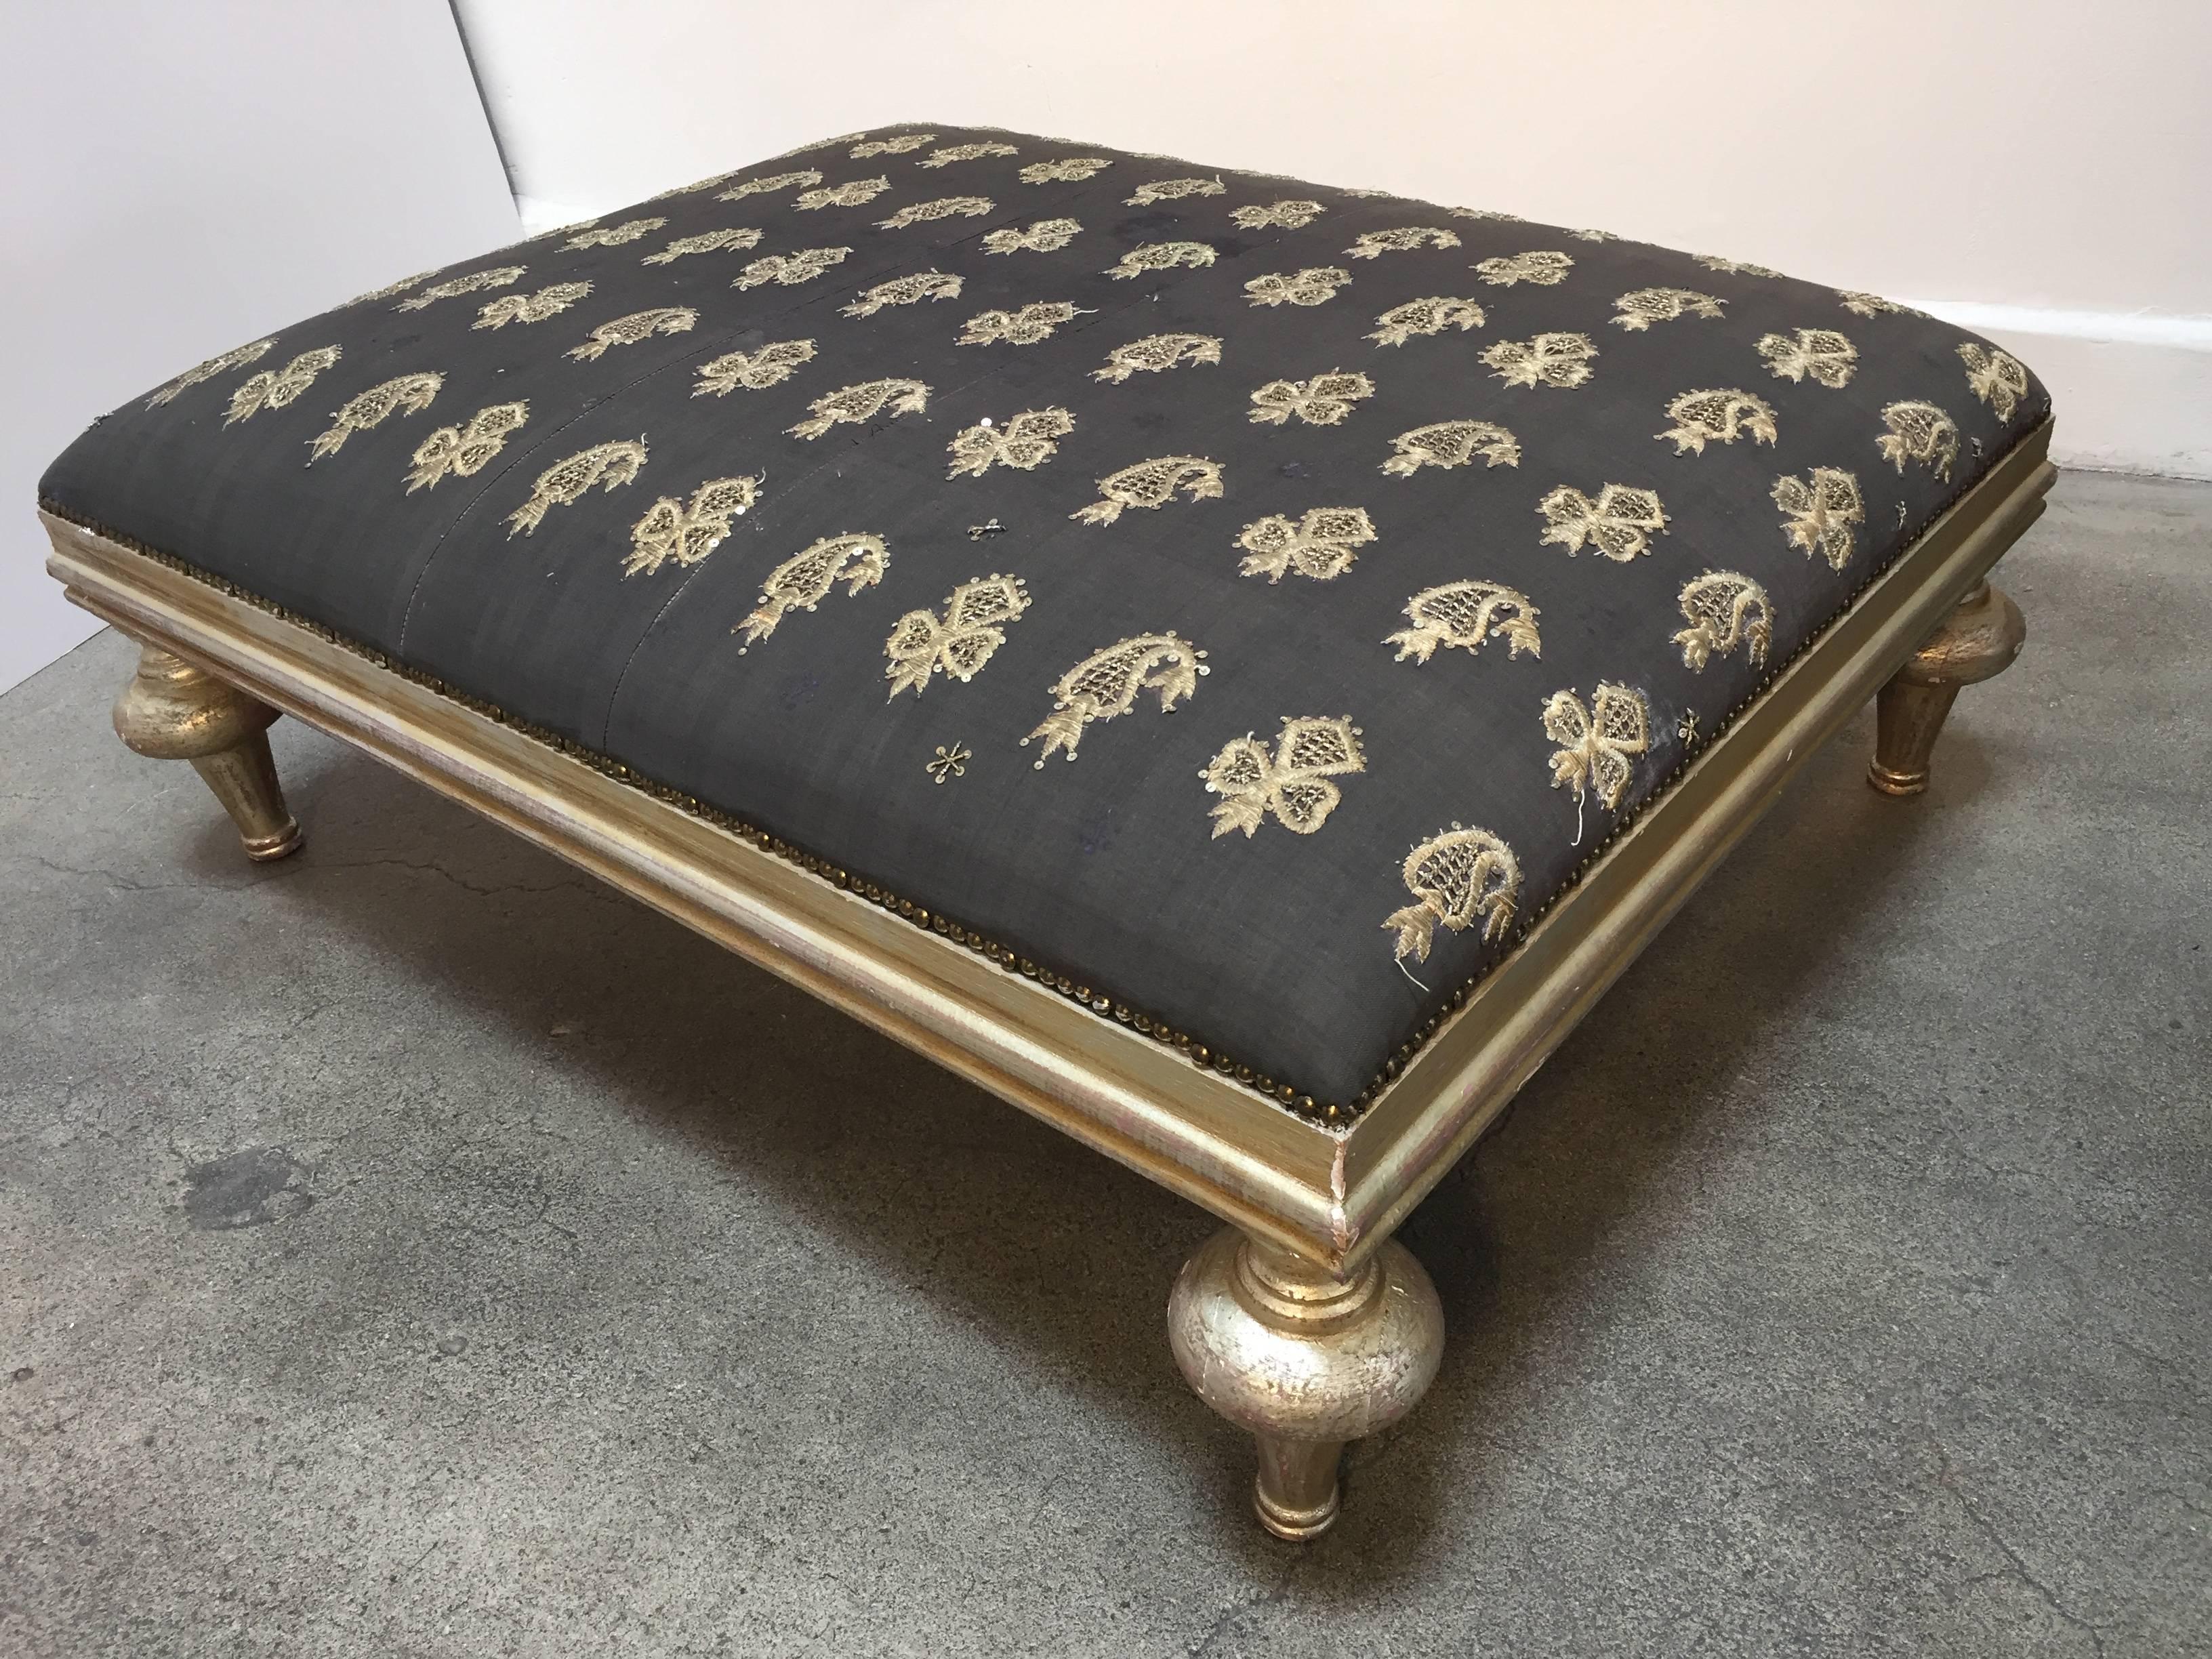 20th Century Ottoman Coffee Table with Vintage Moorish Textile Upholstery from Lebanon